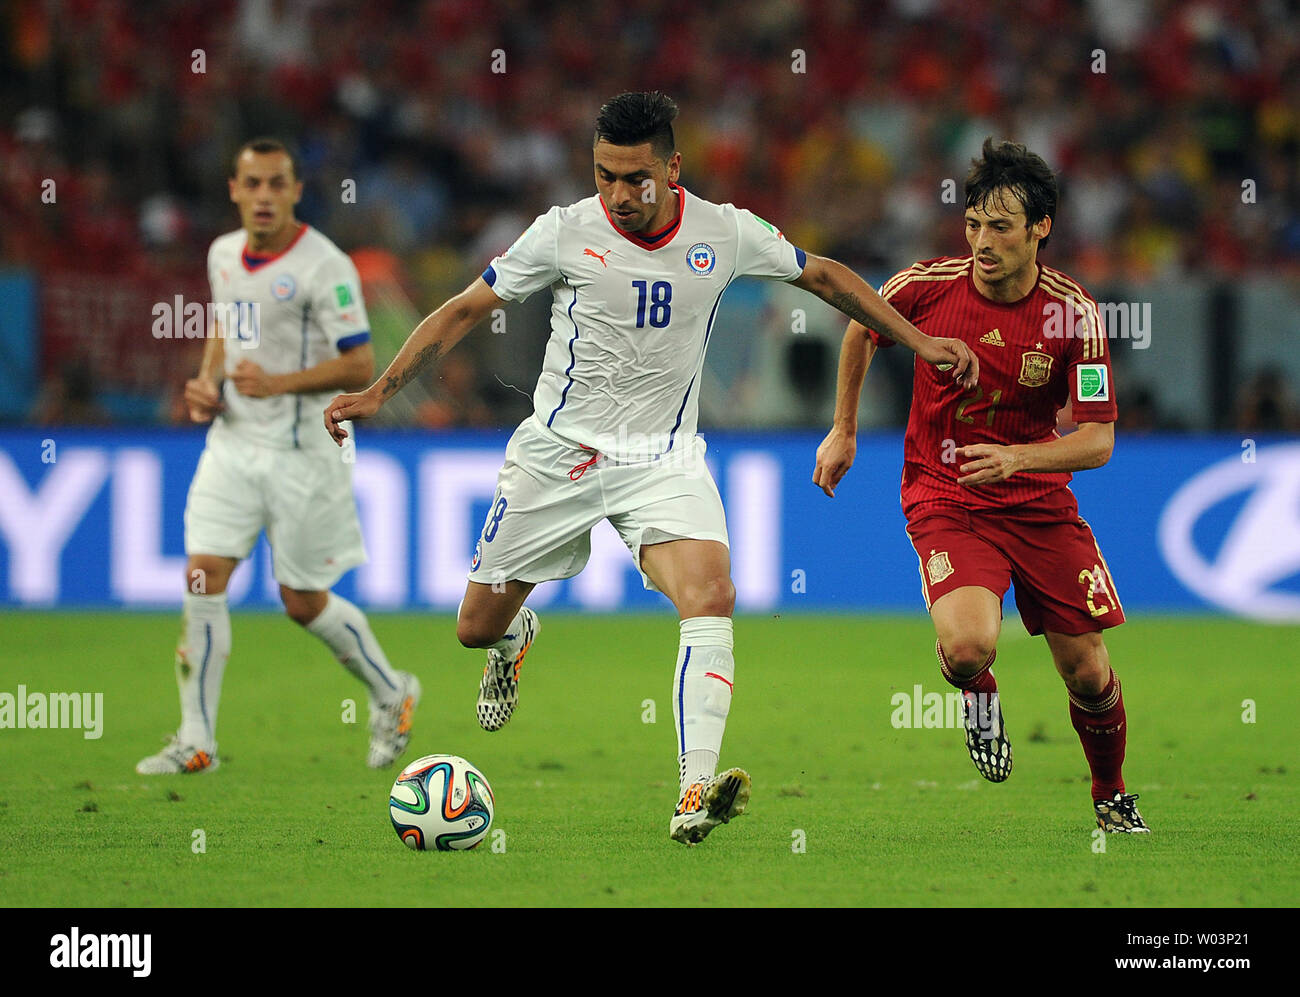 David Silva of Spain competes with Gonzalo Jara (L) of Chile during the 2014 FIFA World Cup Group B match at the Estadio do Maracana in Rio de Janeiro, Brazil on June 18, 2014. UPI/Chris Brunskill Stock Photo